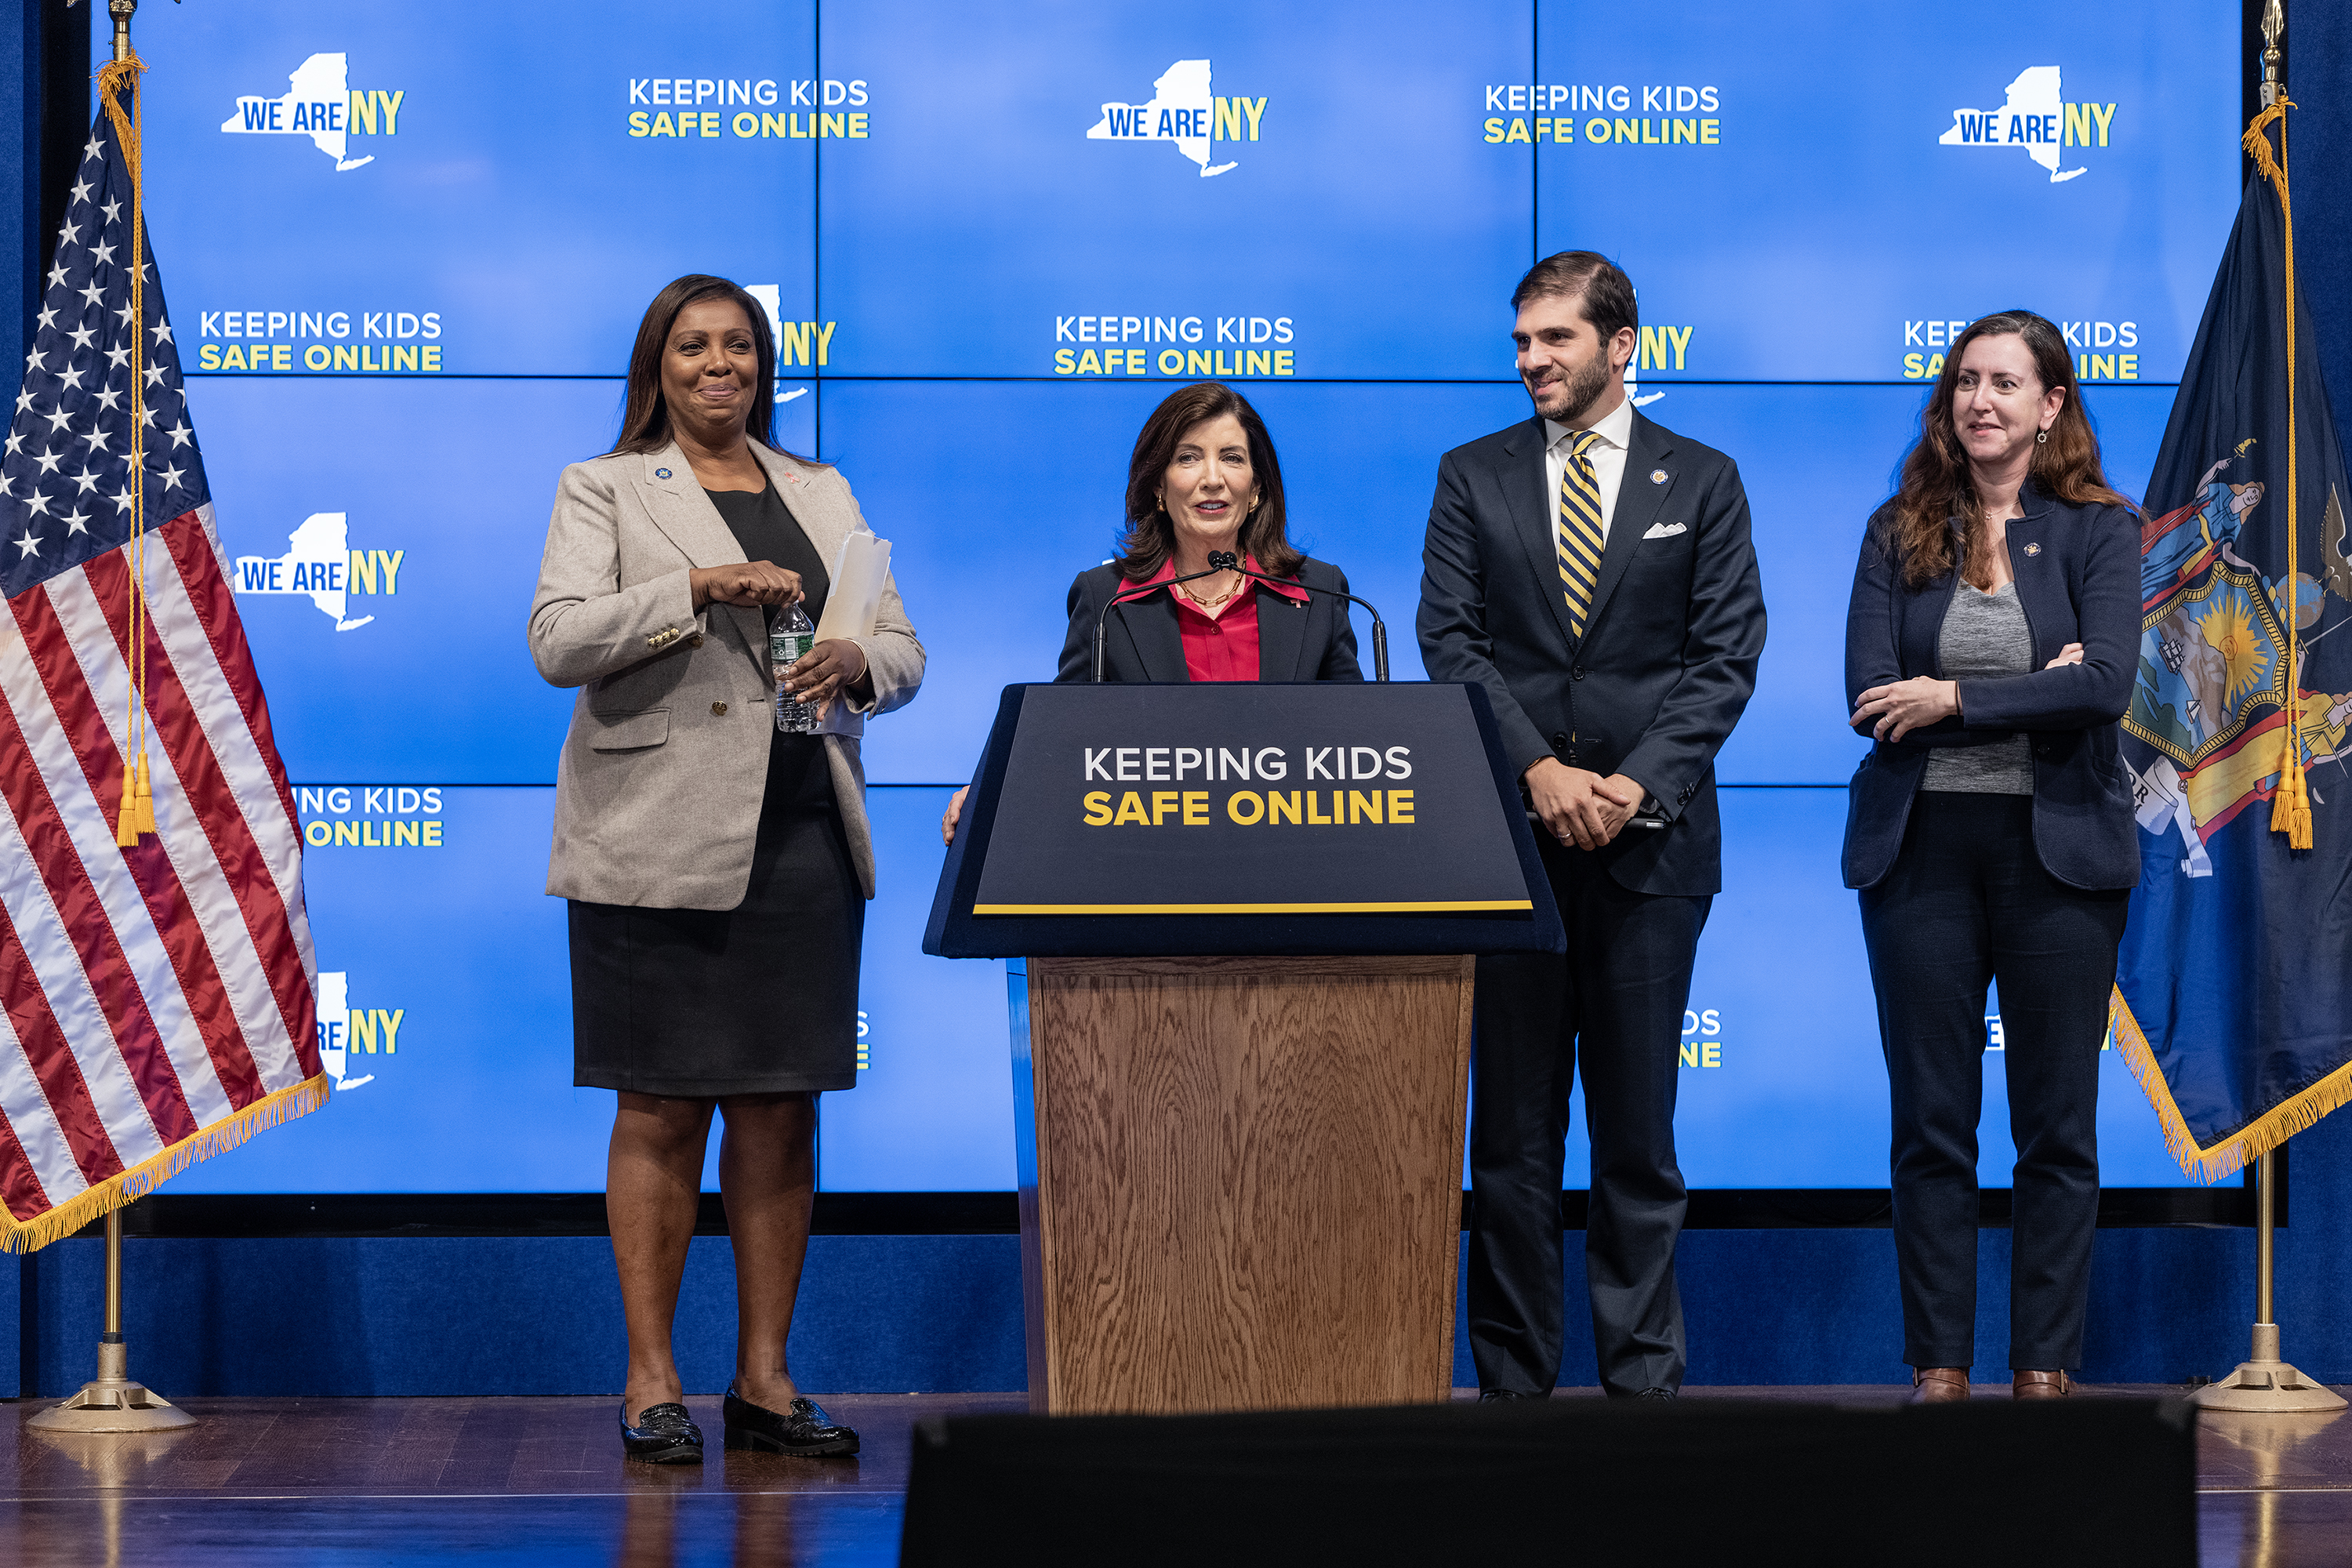 Gov. Kathy Hochul, Attorney General Letitia James, State Sen. Andrew Gounardes and Assemblywoman Nily Rozic make an announcement about social media use among children.